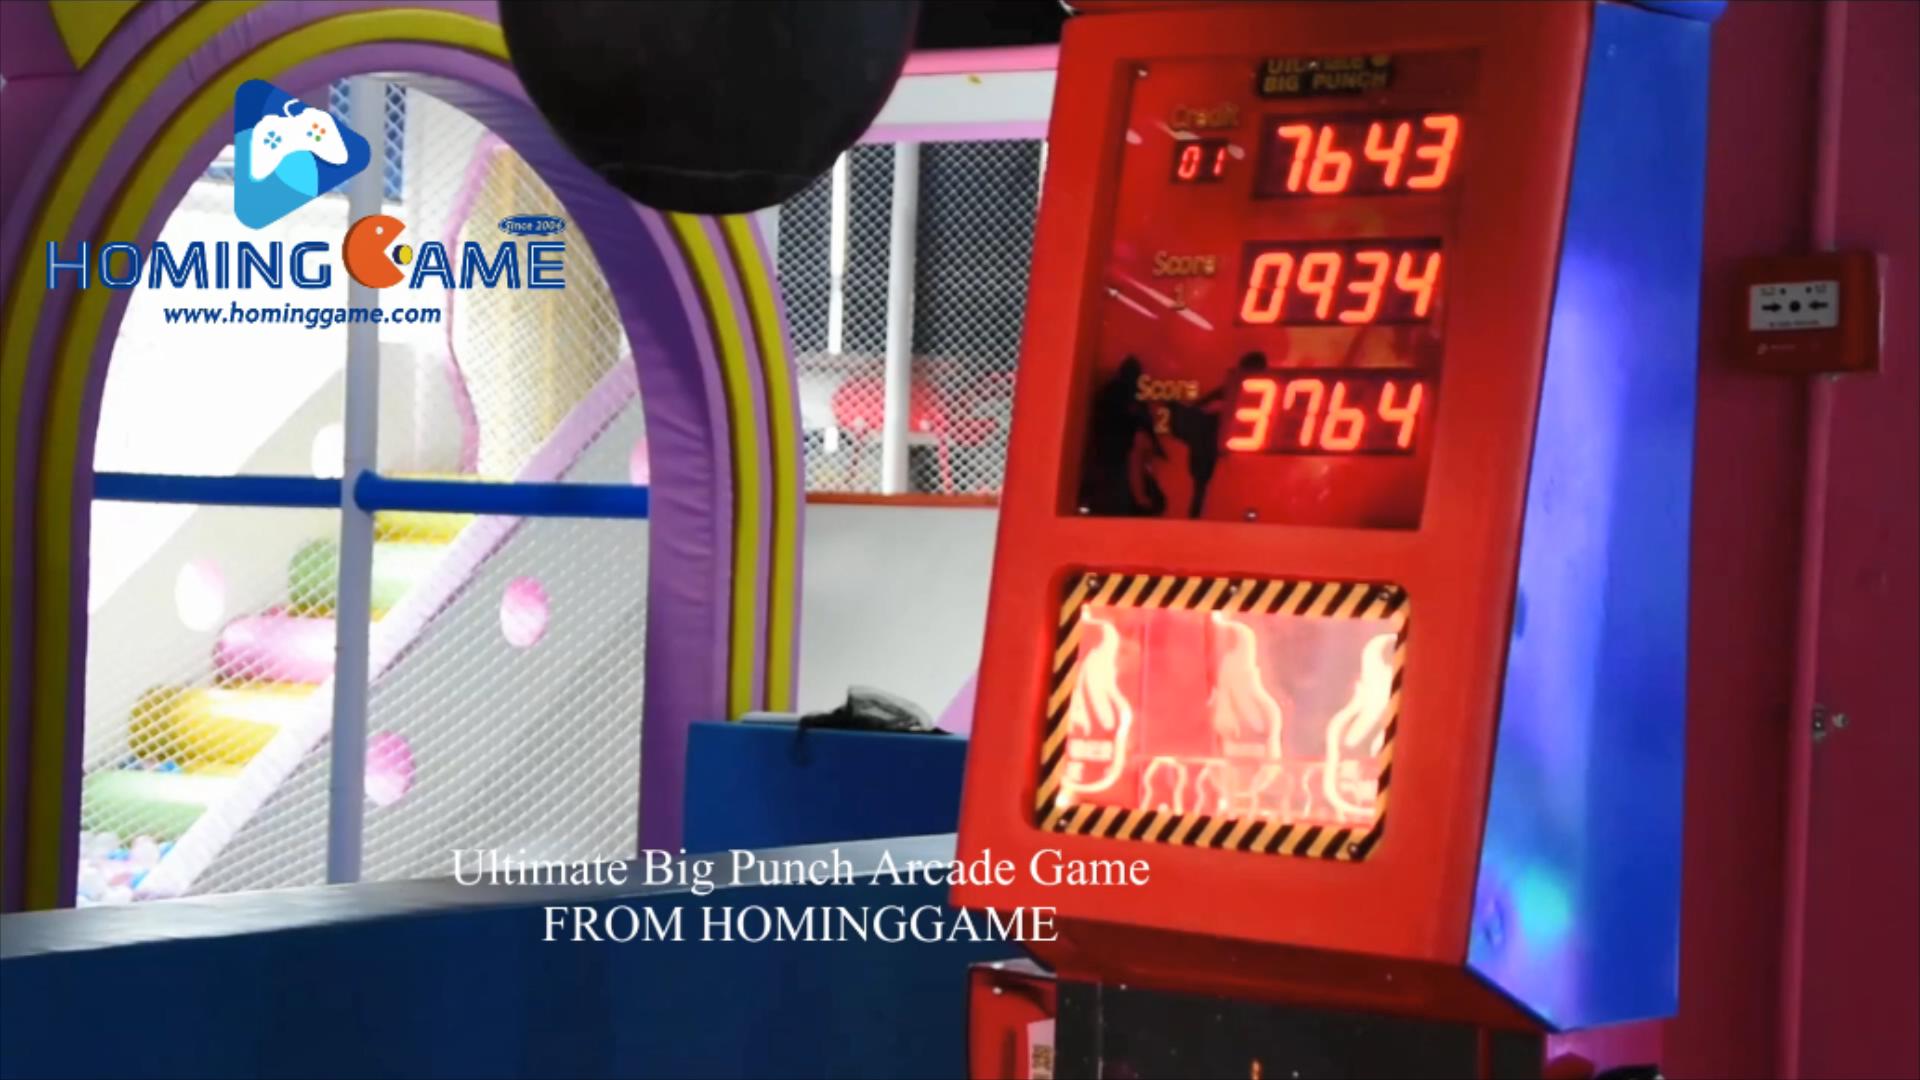 2020 Come To Game Center to Challenge Our HomingGame Popular Boxing Game Ultimate Big Punch Boxing Arcade Game Machine(Order Call Whatsapp:+8618688409495),ultimate big punch boxing arcade game machine,ultimate big punch boxing game machine,boxing game machine,boxing arcade game machine,ultimate big punch game machine,boxing machine,boxing game,boxing arcade game,boxing redemption game machine,lutiamte big punch payout cocola prize game machine,boxing prize game machine,game machine,arcade game machine,coin operated game machine,indoor game machine,electrical game machine,amusement park game equipment,game equipment,amusement machine,entertainment game machine,family entertainment game machine,sports game,sports game machine,redemption game machine,lottery game machine,prize game machine,boxing arcade,hominggame,www.gametube.hk,hominggame game machine,hominggame boxing machine,ultimate big punch boxing arcade game